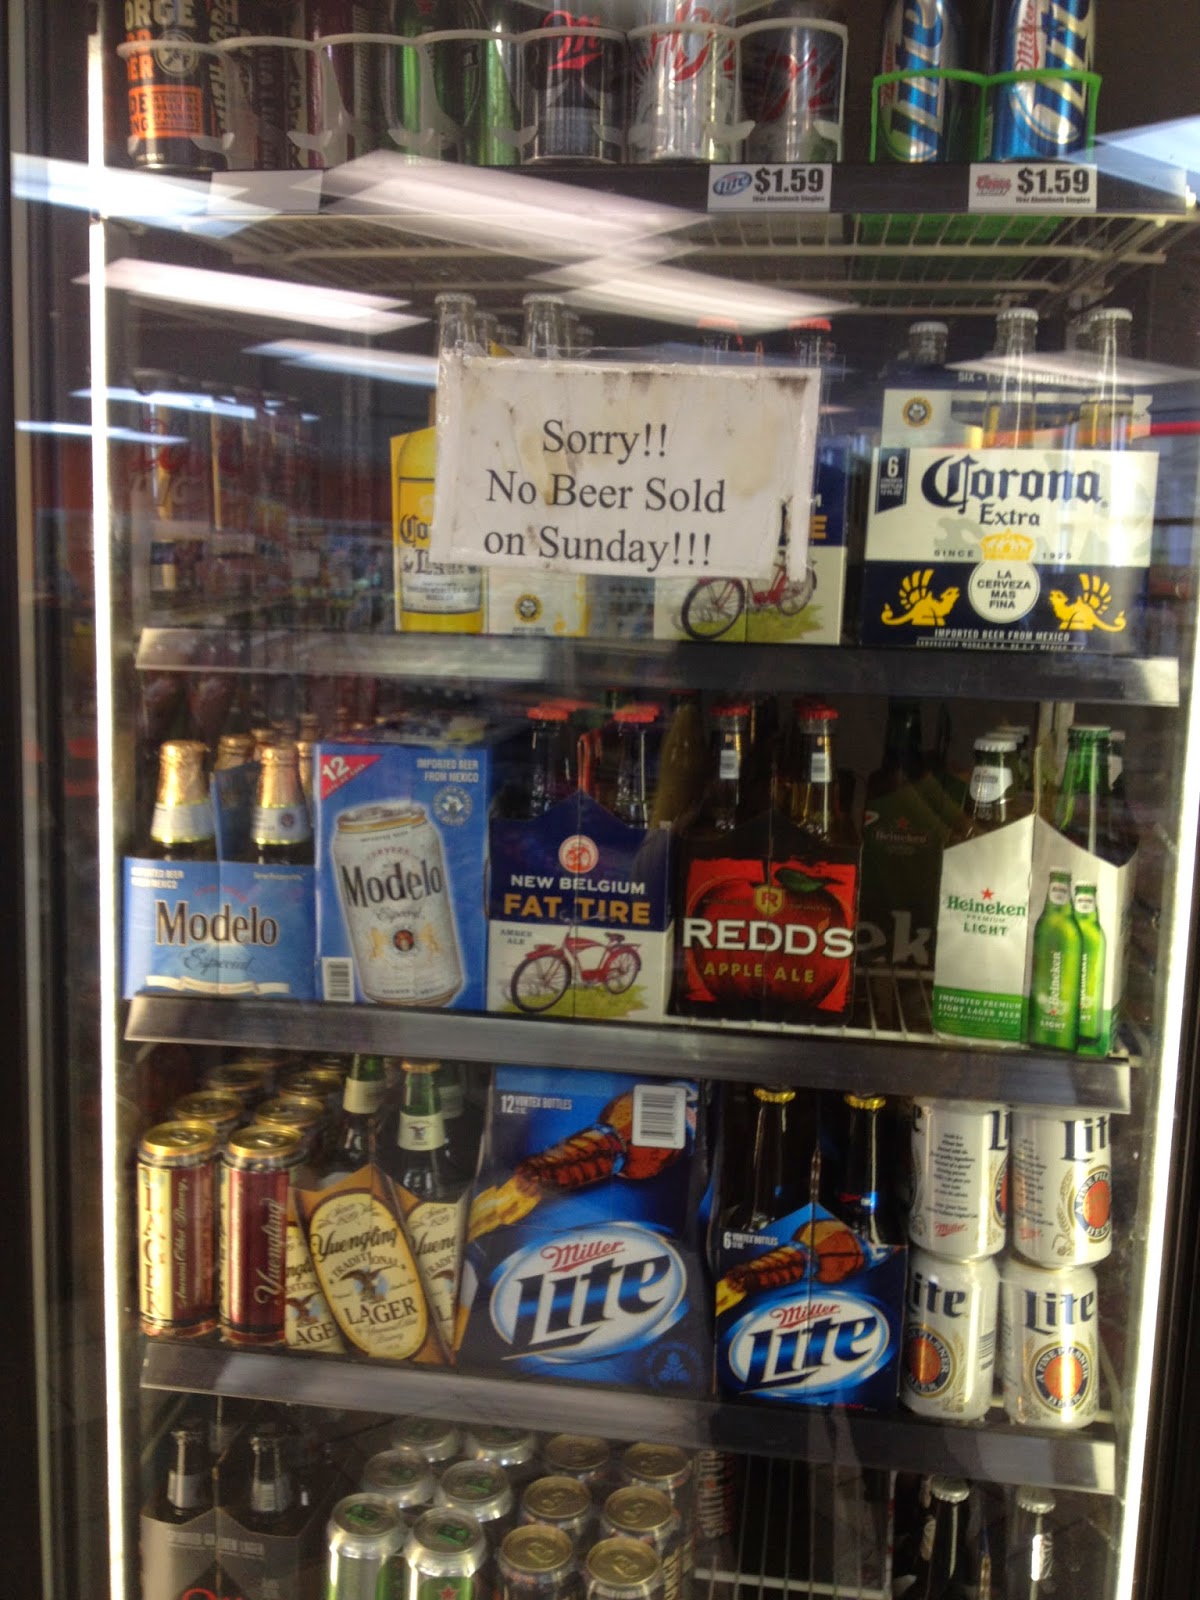 Do they sell beer in Alabama on Sundays?